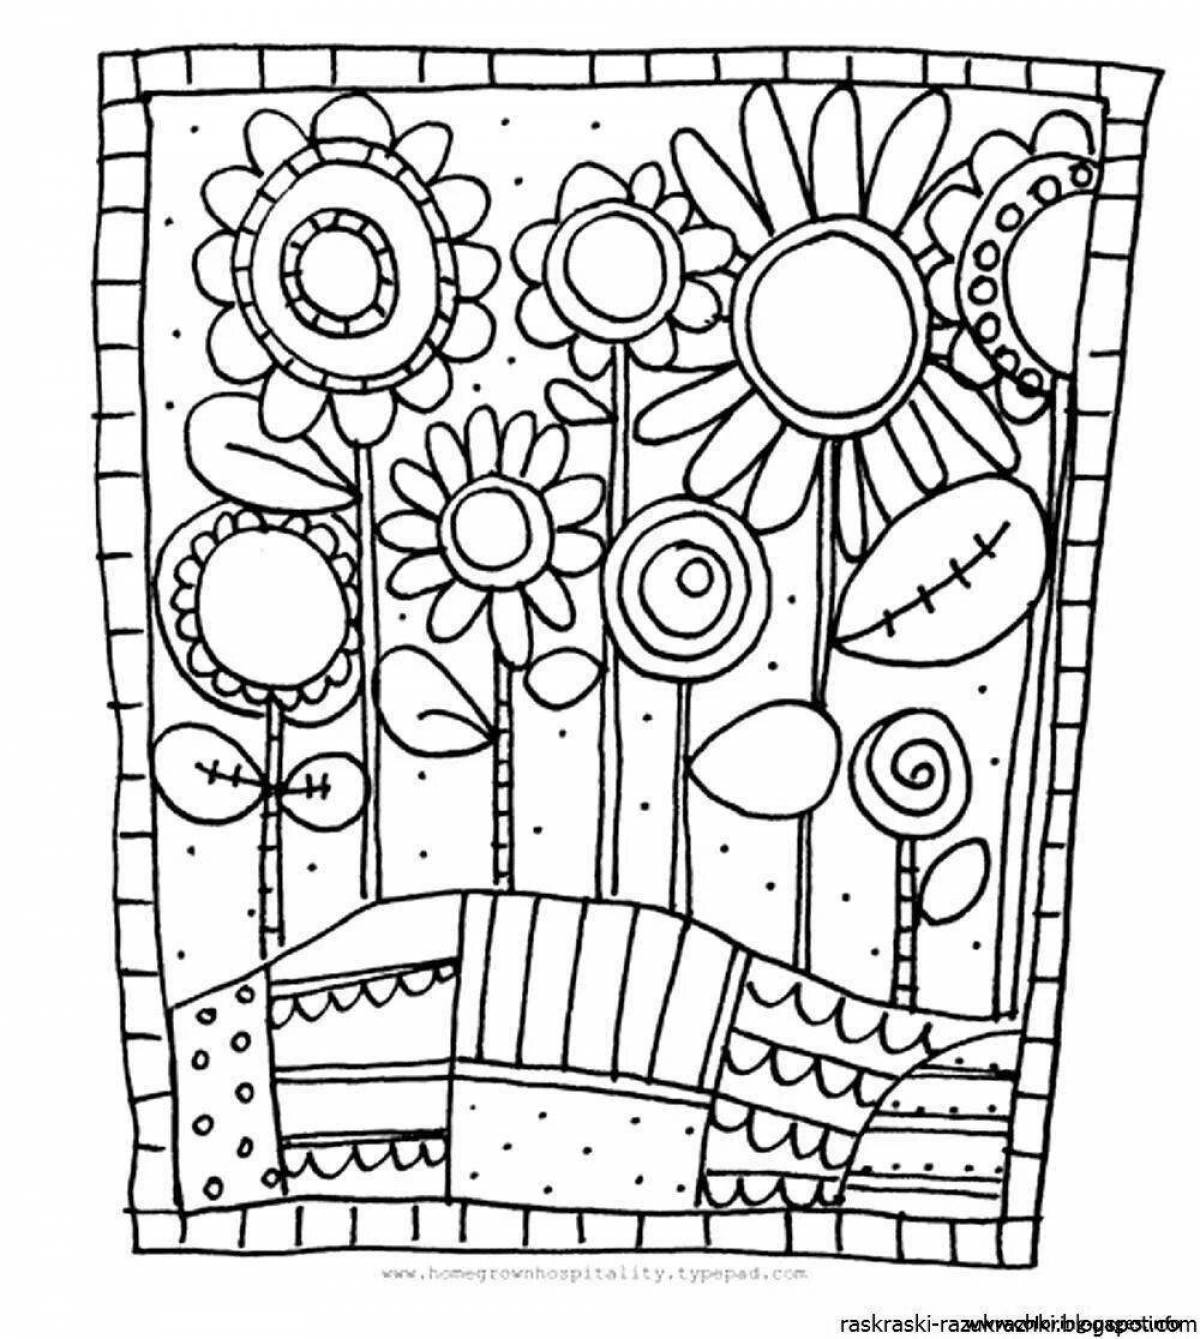 Fun art therapy coloring book for kids